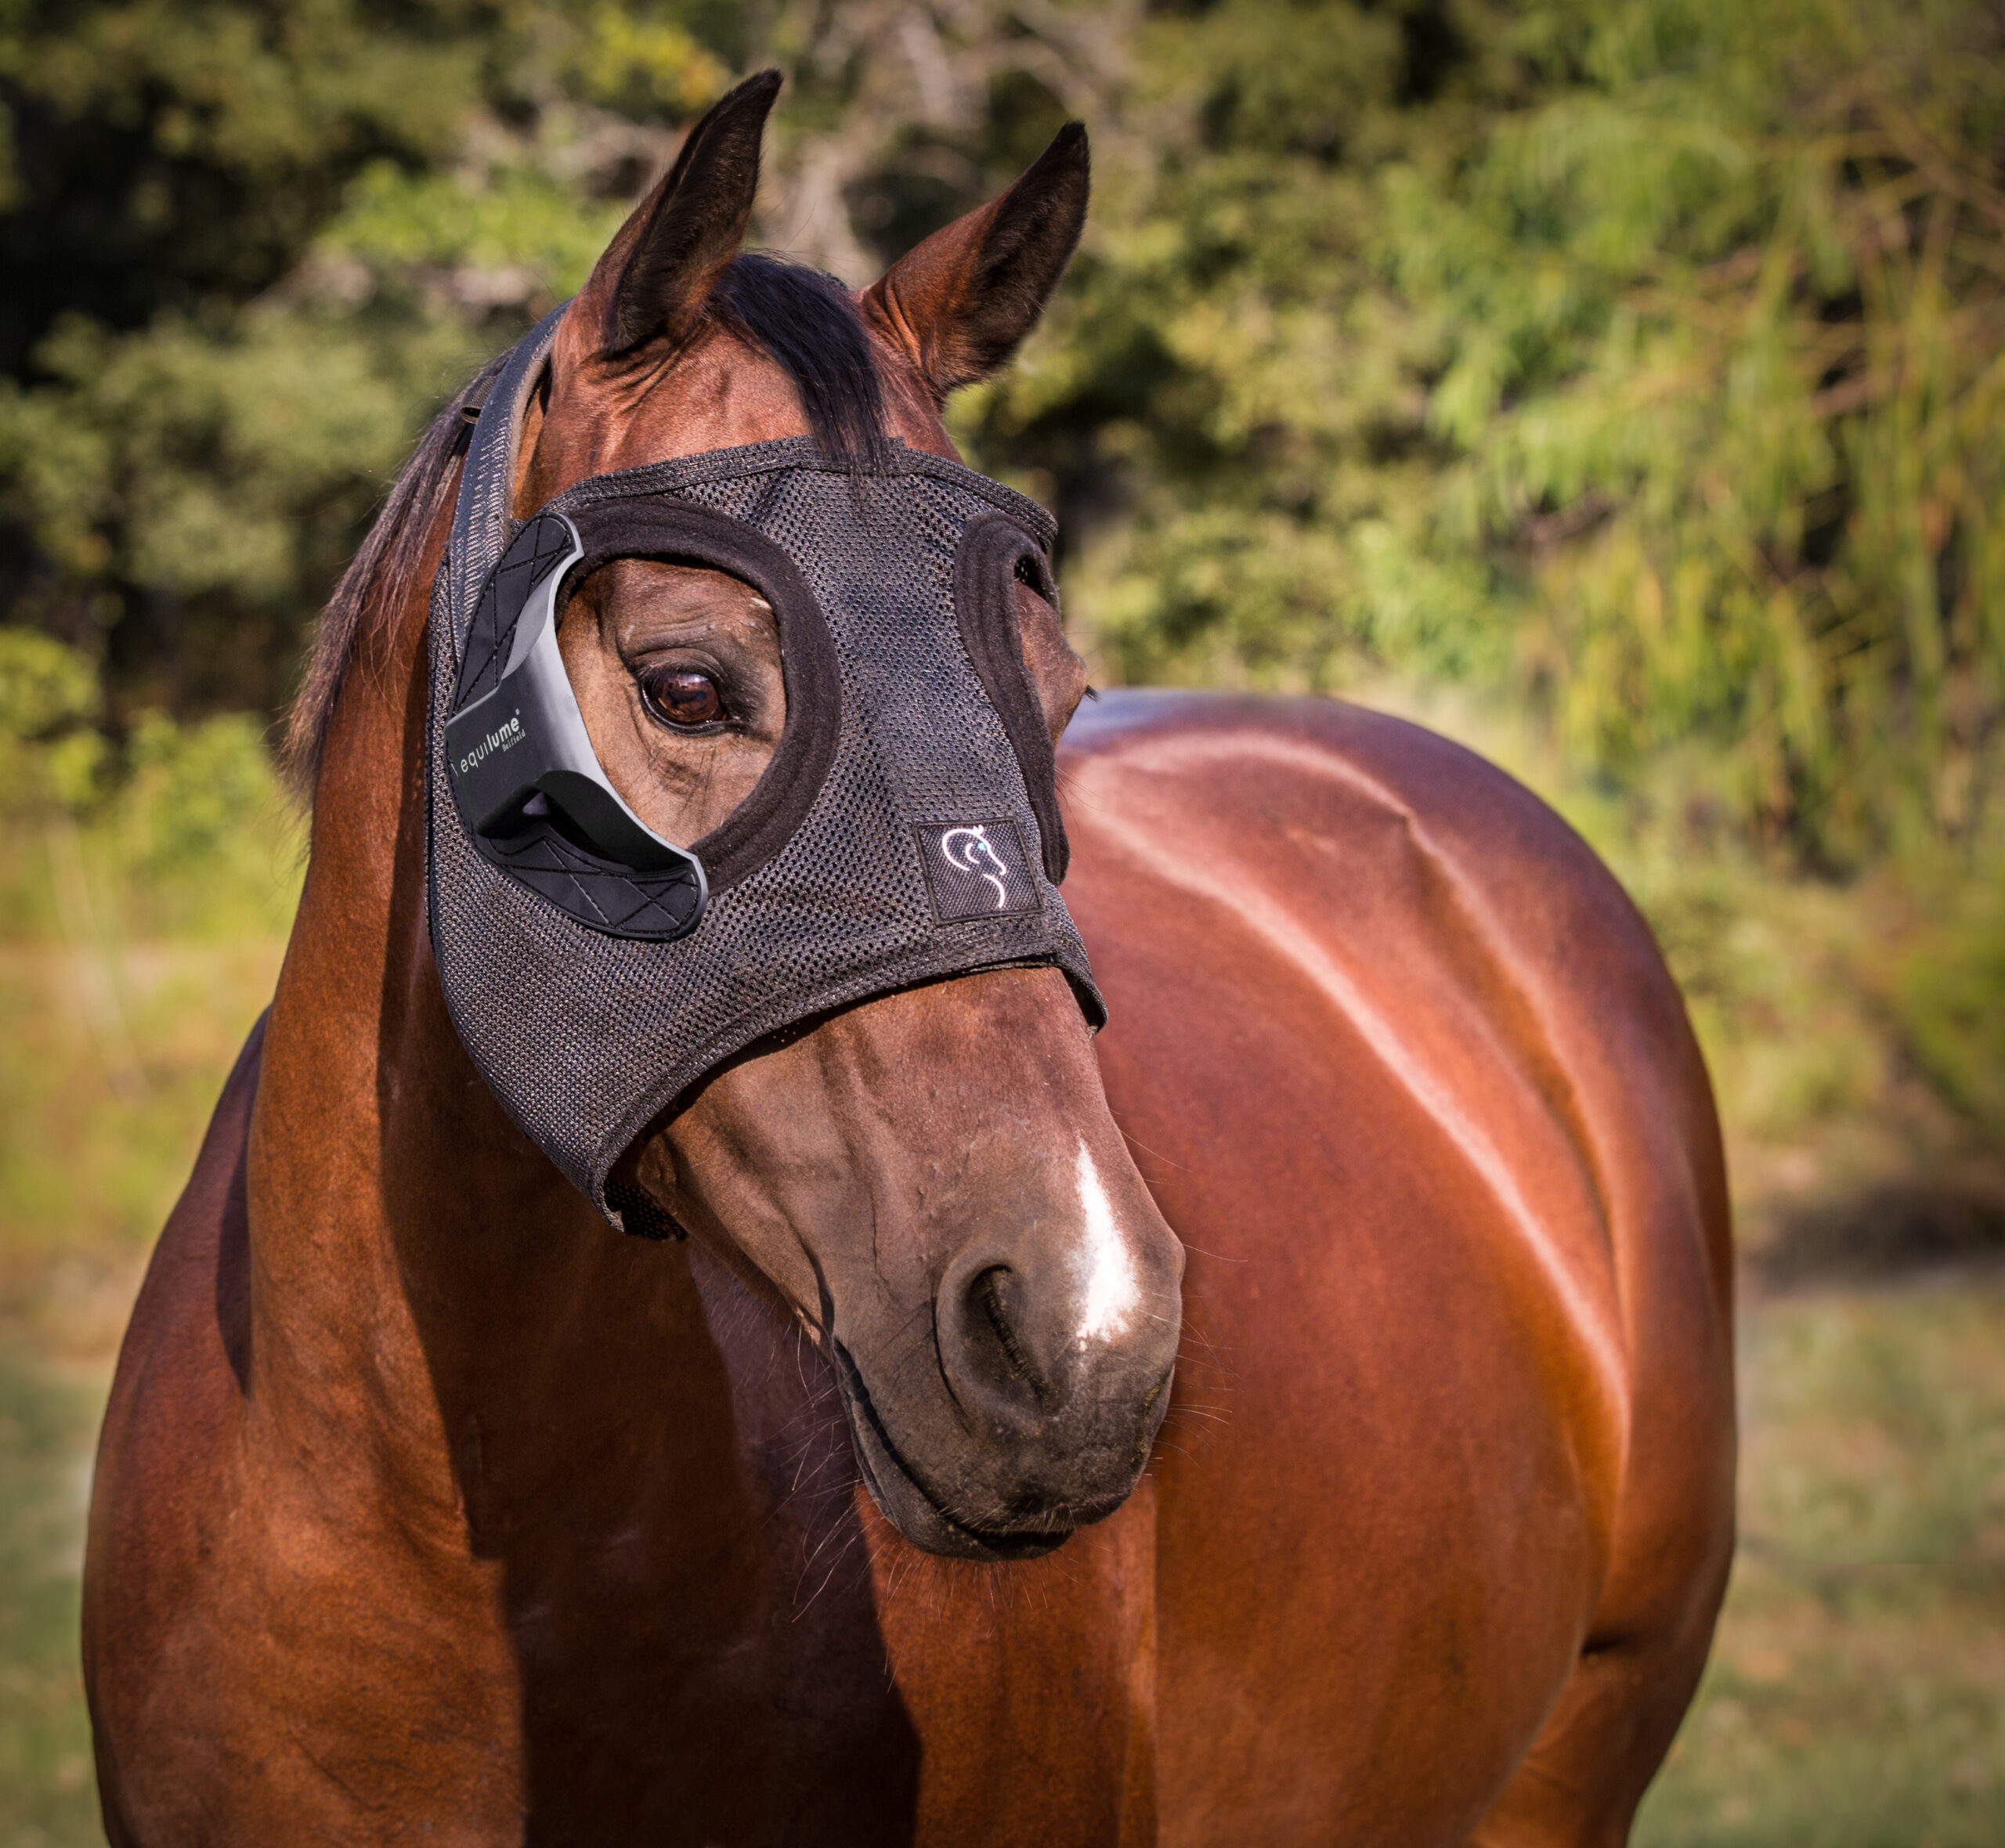 Bay Pregnant Mare wearing an Equilume Belfield Light Mask